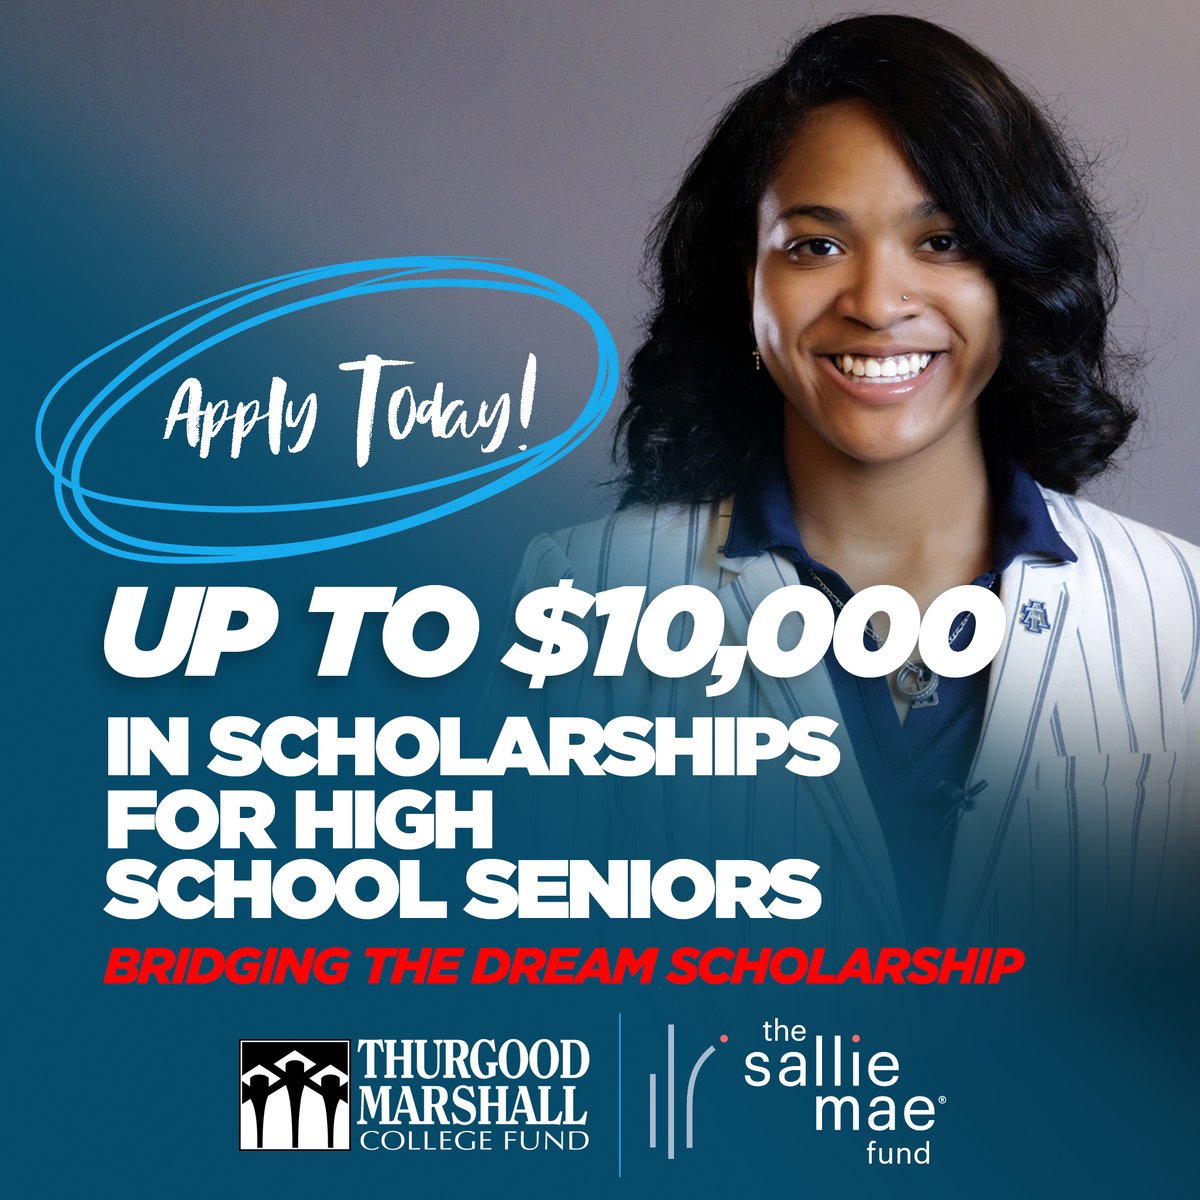 Now through May 17, in partnership with the @SallieMae Fund, the Bridging the Dream Scholarship is offering 40 high school seniors up to $10,000 to help fund their higher education journeys. Learn more: tmcf.org/students-alumn… #BridgingTheDream